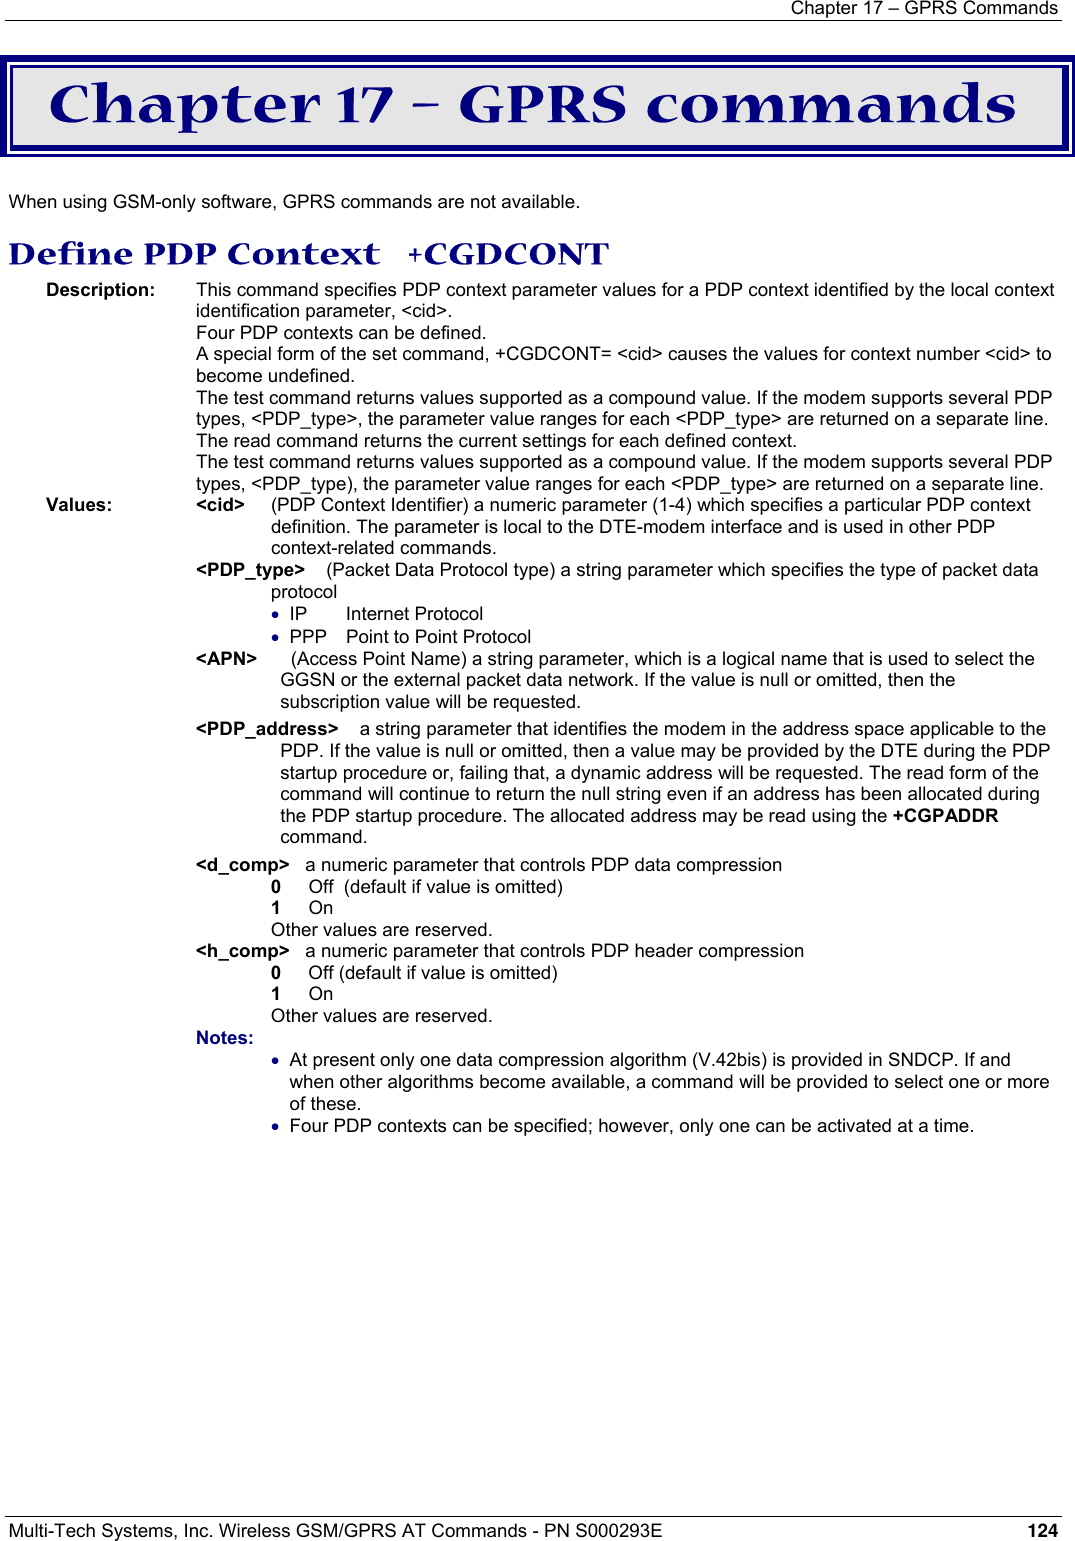 Chapter 17 – GPRS Commands  Multi-Tech Systems, Inc. Wireless GSM/GPRS AT Commands - PN S000293E 124  Chapter 17 – GPRS commands  When using GSM-only software, GPRS commands are not available. Define PDP Context   +CGDCONT Description:  This command specifies PDP context parameter values for a PDP context identified by the local context identification parameter, &lt;cid&gt;.    Four PDP contexts can be defined.    A special form of the set command, +CGDCONT= &lt;cid&gt; causes the values for context number &lt;cid&gt; to become undefined.    The test command returns values supported as a compound value. If the modem supports several PDP types, &lt;PDP_type&gt;, the parameter value ranges for each &lt;PDP_type&gt; are returned on a separate line.    The read command returns the current settings for each defined context.    The test command returns values supported as a compound value. If the modem supports several PDP types, &lt;PDP_type), the parameter value ranges for each &lt;PDP_type&gt; are returned on a separate line. Values: &lt;cid&gt;   (PDP Context Identifier) a numeric parameter (1-4) which specifies a particular PDP context definition. The parameter is local to the DTE-modem interface and is used in other PDP context-related commands.  &lt;PDP_type&gt;    (Packet Data Protocol type) a string parameter which specifies the type of packet data protocol • IP Internet Protocol • PPP  Point to Point Protocol &lt;APN&gt;     (Access Point Name) a string parameter, which is a logical name that is used to select the GGSN or the external packet data network. If the value is null or omitted, then the subscription value will be requested. &lt;PDP_address&gt;    a string parameter that identifies the modem in the address space applicable to the PDP. If the value is null or omitted, then a value may be provided by the DTE during the PDP startup procedure or, failing that, a dynamic address will be requested. The read form of the command will continue to return the null string even if an address has been allocated during the PDP startup procedure. The allocated address may be read using the +CGPADDR command. &lt;d_comp&gt;   a numeric parameter that controls PDP data compression 0   Off  (default if value is omitted) 1   On  Other values are reserved. &lt;h_comp&gt;   a numeric parameter that controls PDP header compression  0  Off (default if value is omitted) 1   On Other values are reserved. Notes:  • At present only one data compression algorithm (V.42bis) is provided in SNDCP. If and when other algorithms become available, a command will be provided to select one or more of these. • Four PDP contexts can be specified; however, only one can be activated at a time. 